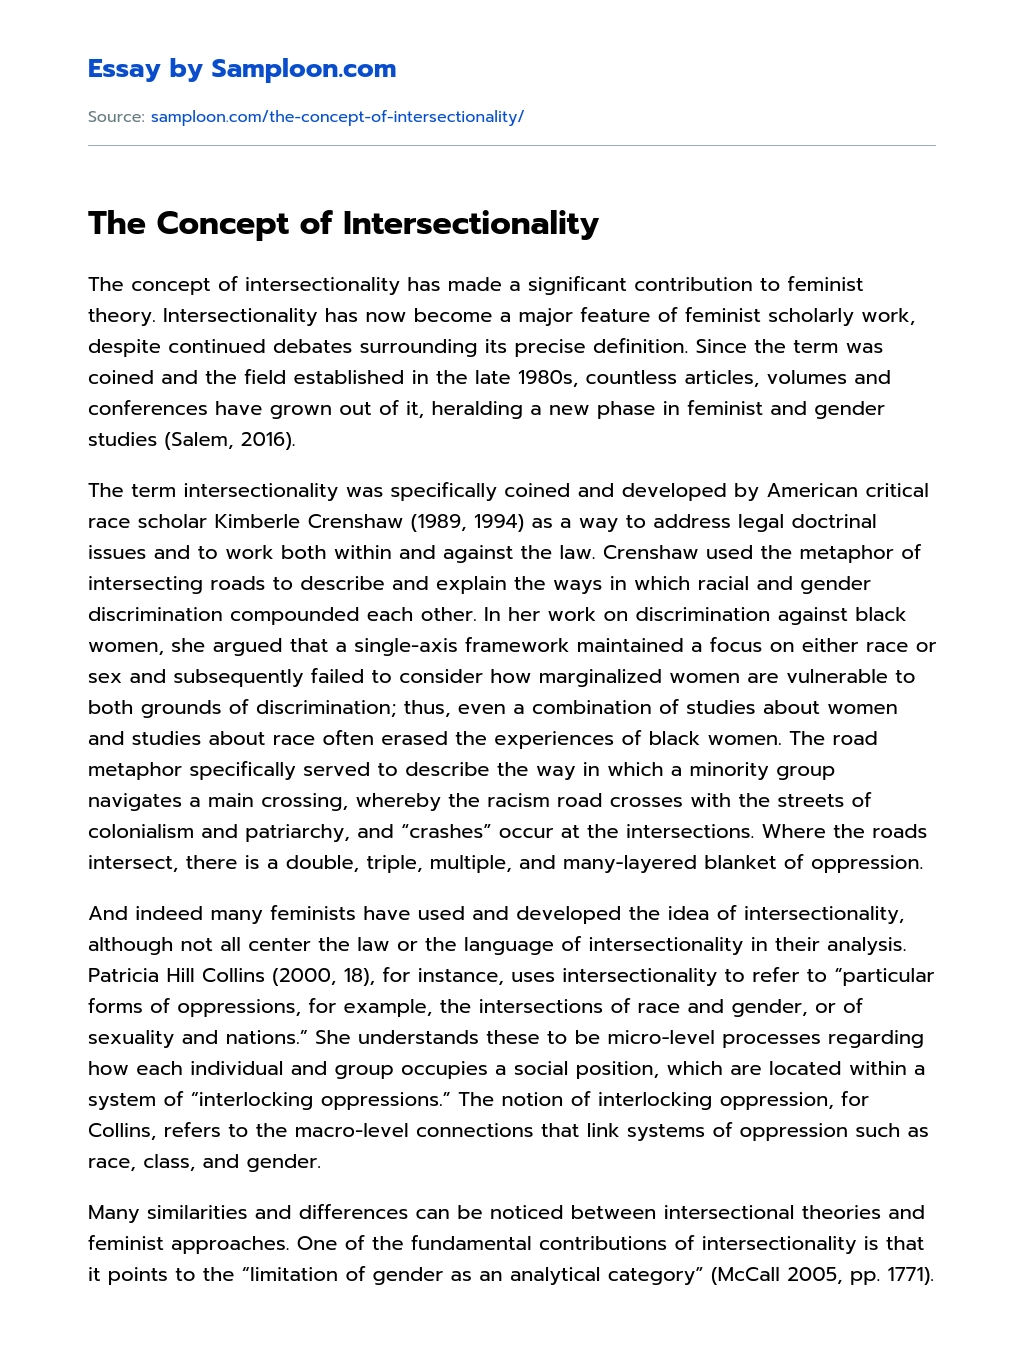 The Concept of Intersectionality Argumentative Essay essay